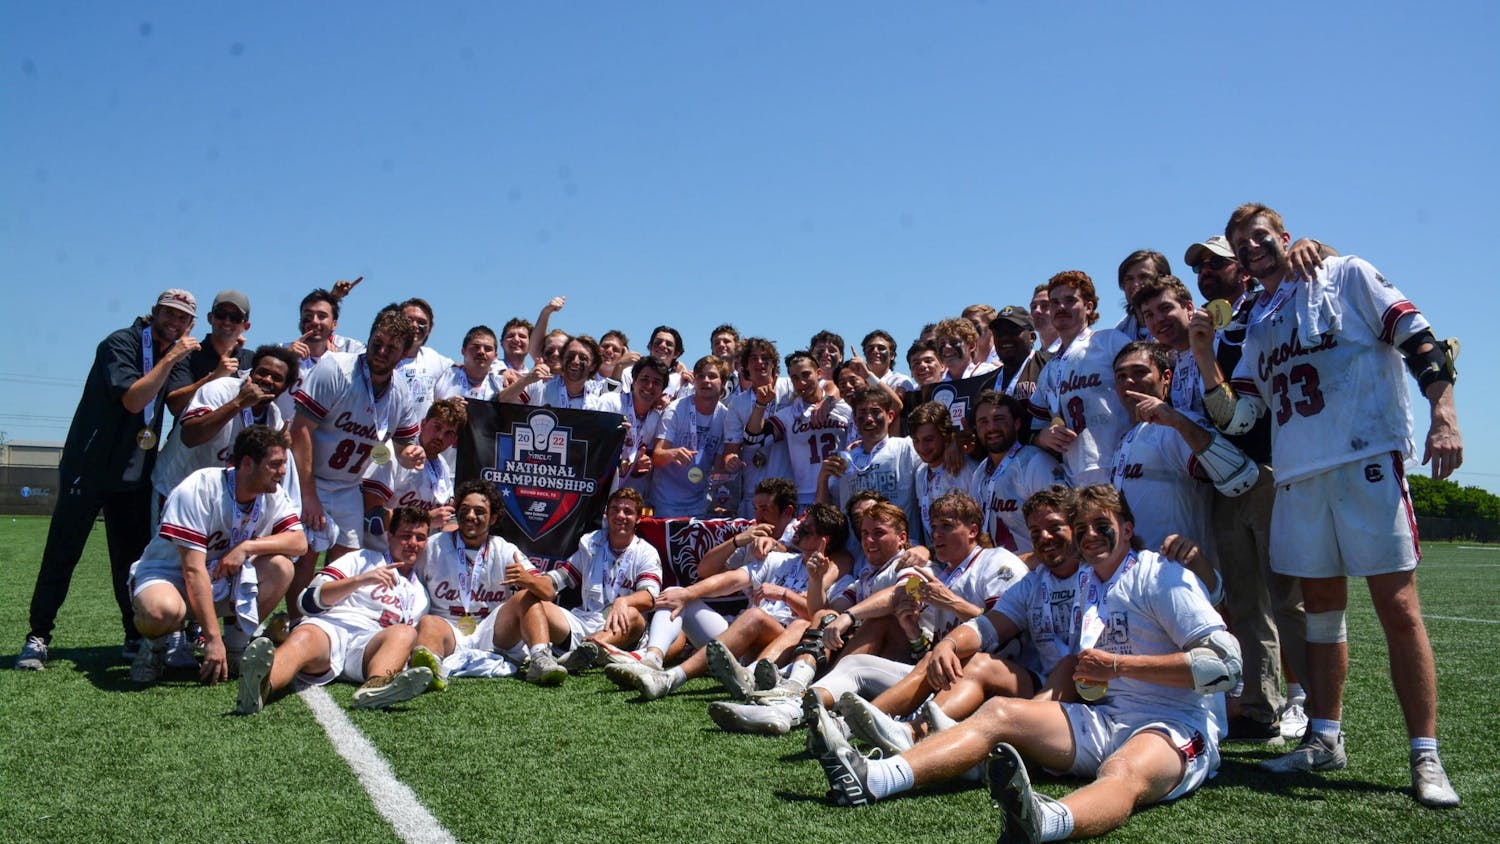 South Carolina's club lacrosse team poses with medals and a banner after winning the national championship on May 14, 2022. The team beat Georgia Tech in an 11-9 victory.&nbsp;